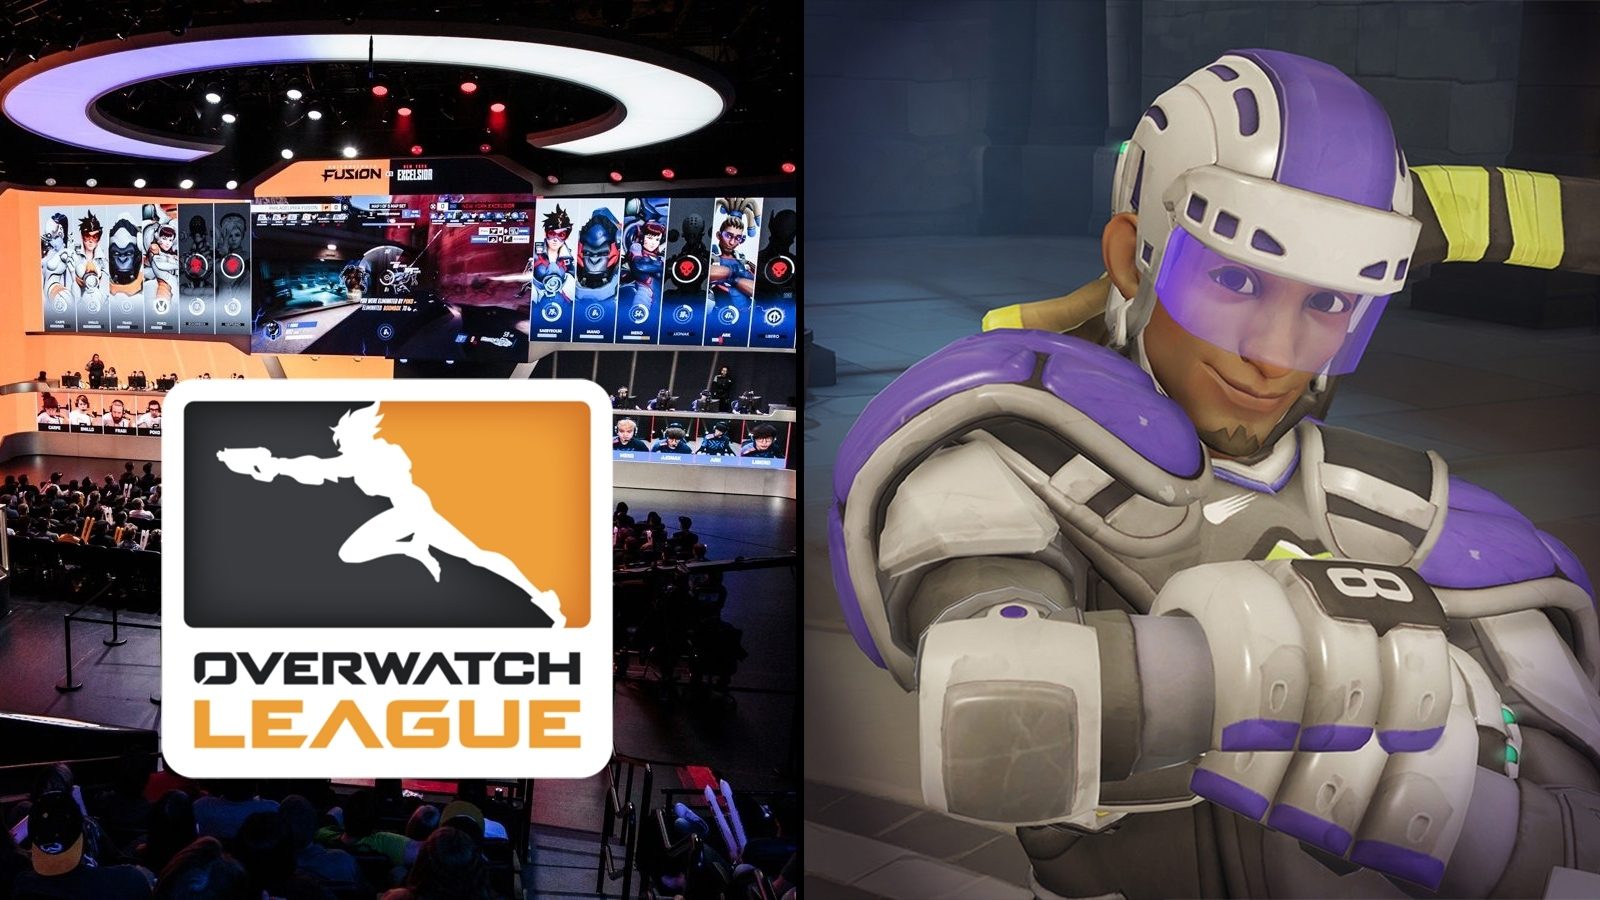 Fan creates a ton of awesome Overwatch League hockey jersey